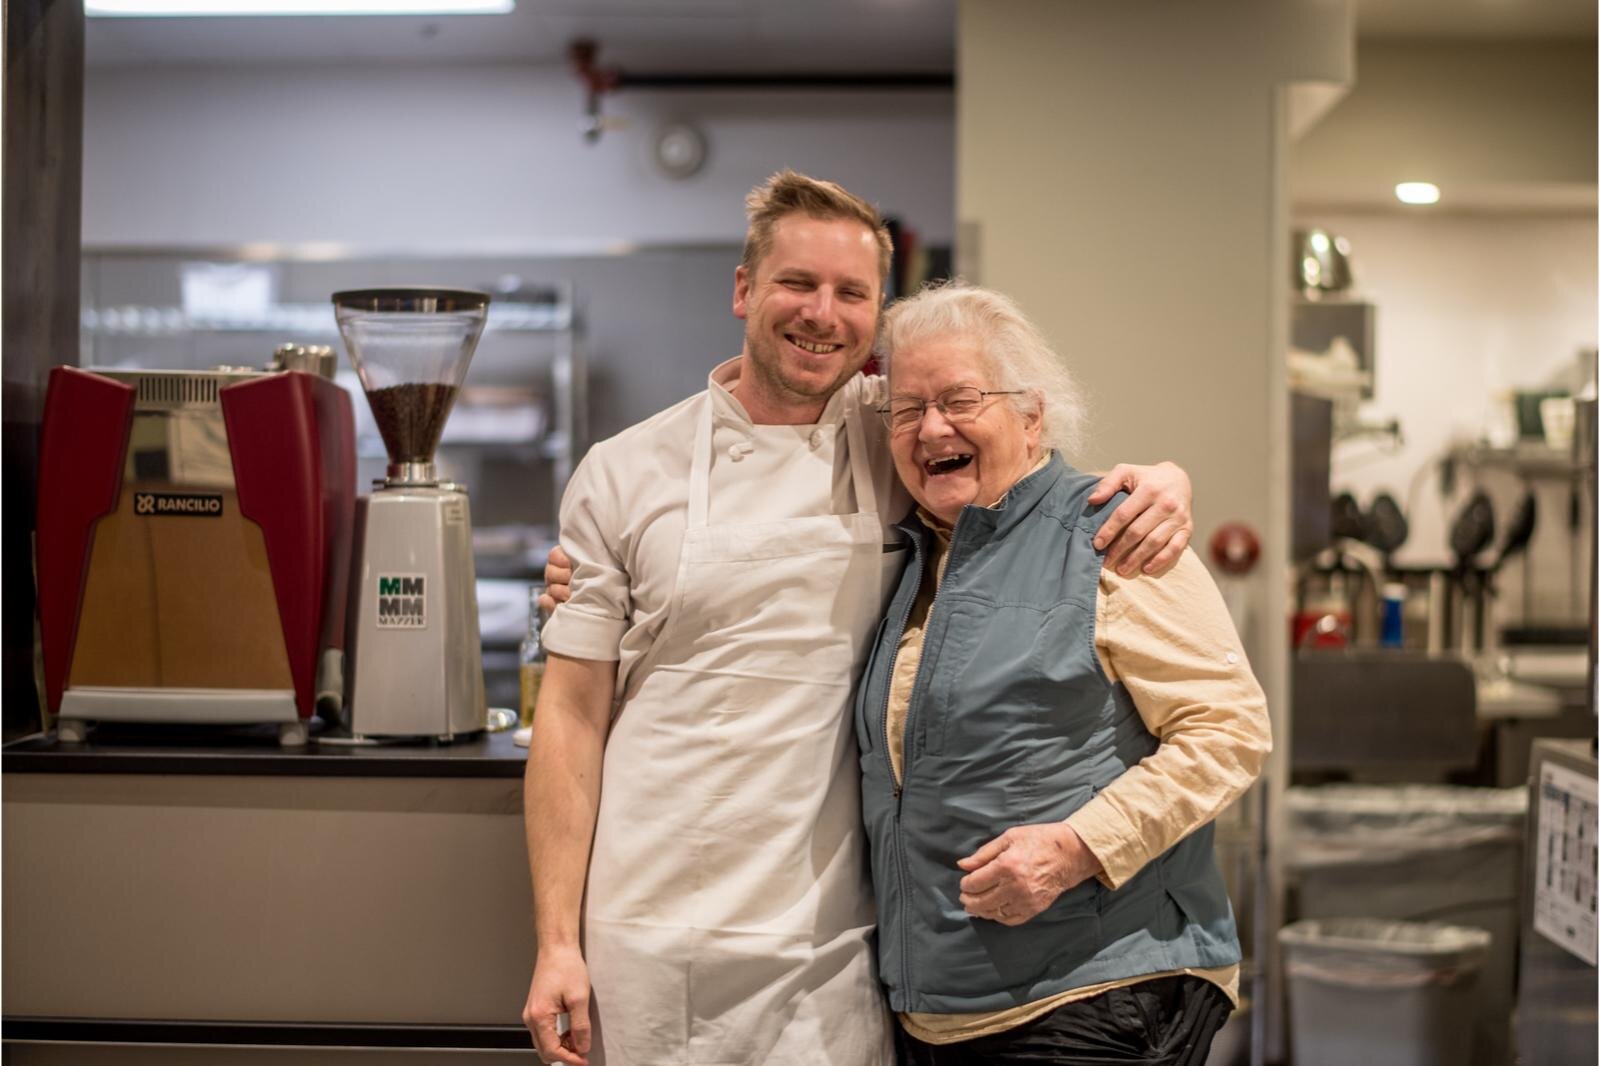 Alec Wells and Judy Sarkozy together will soon celebrate the bakery's 50th year.